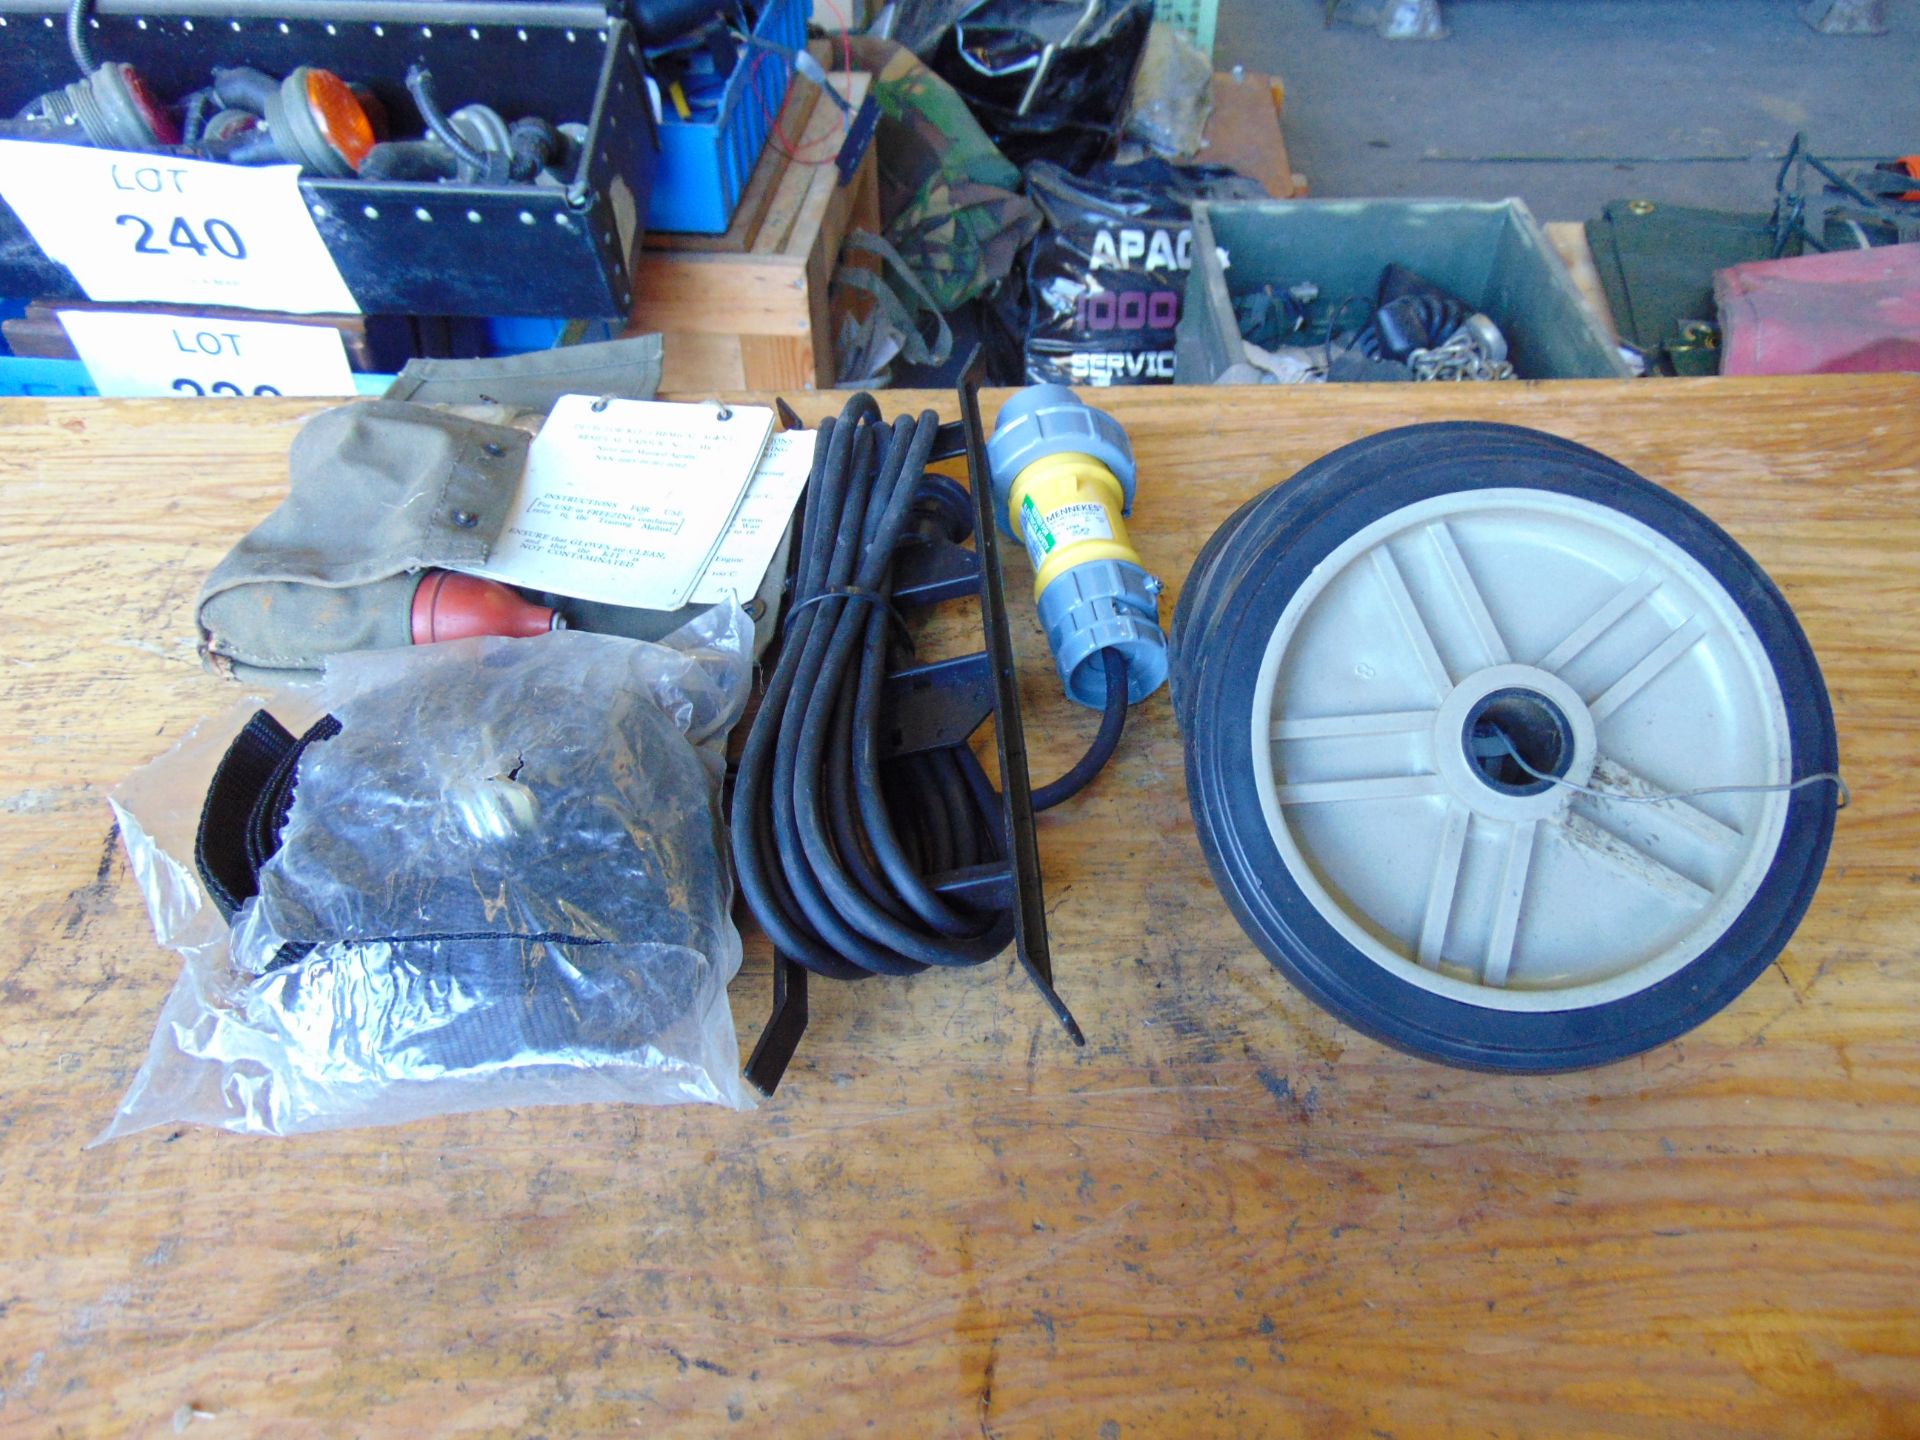 Wheels, Ext Lead, Straps, Chemical Agent Test Kit - Image 4 of 6